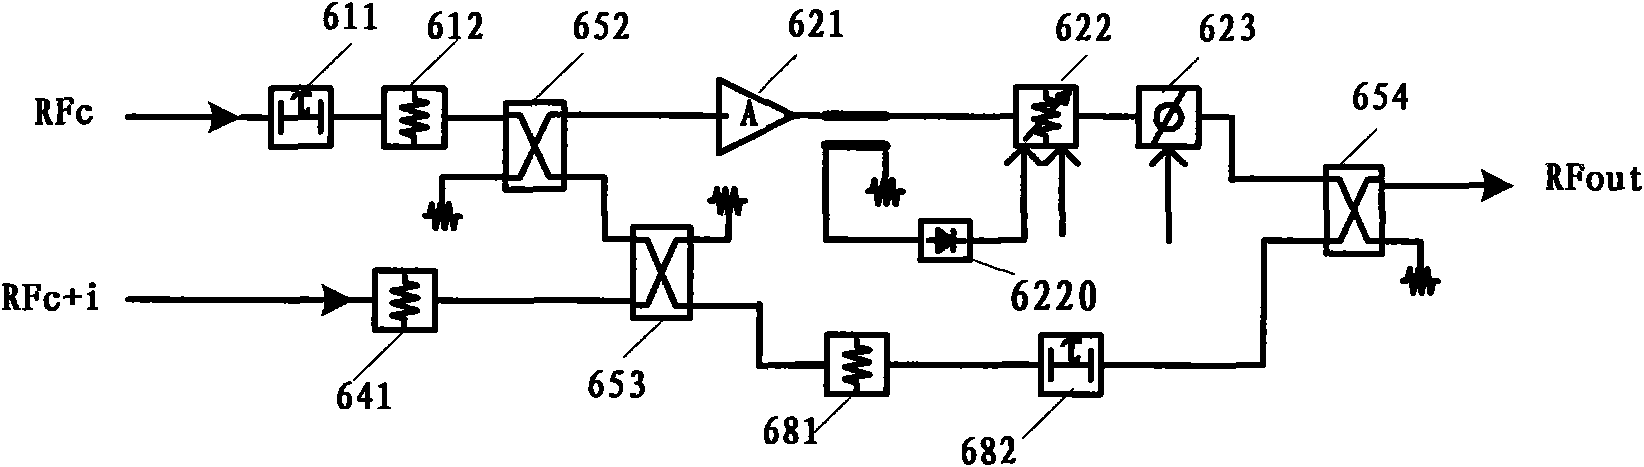 Pre-distorted radio frequency amplifier